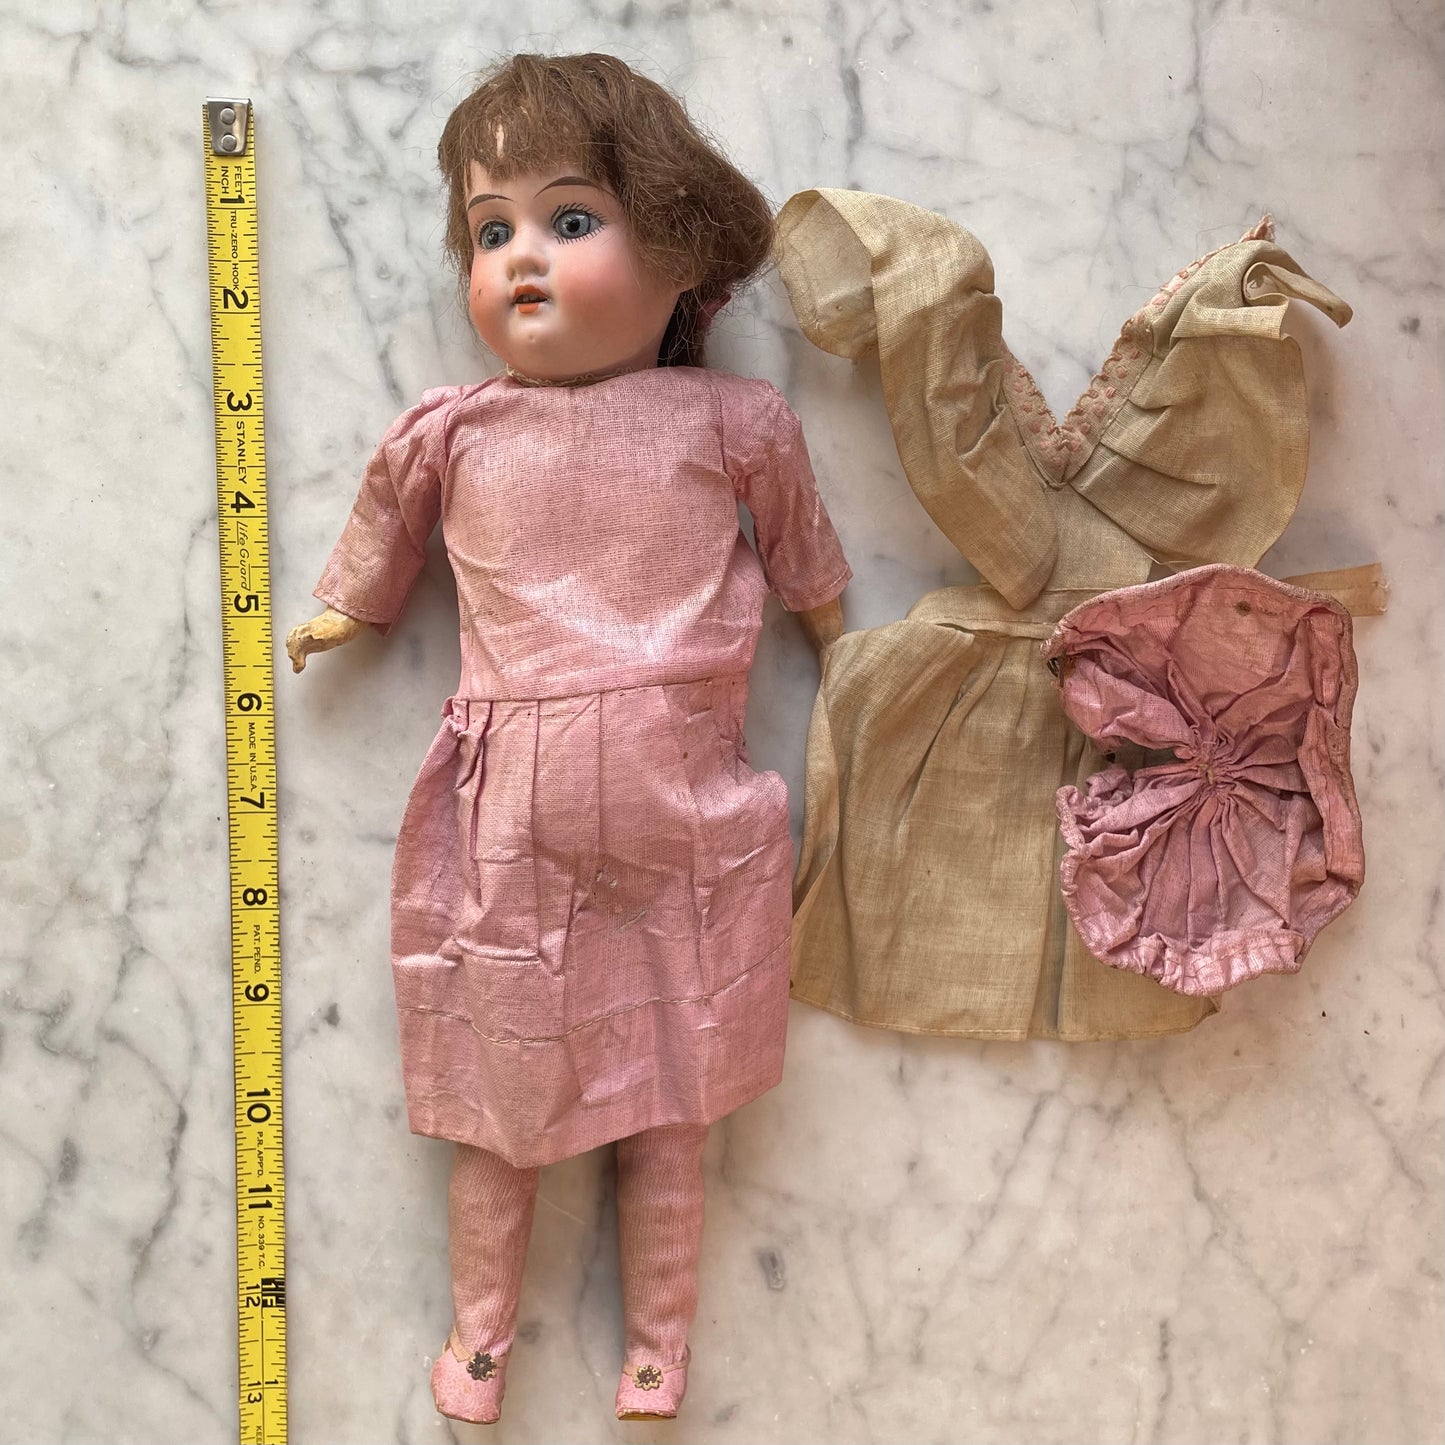 Antique Armand Marseille Doll | Model 390 with Clothes & Accessories